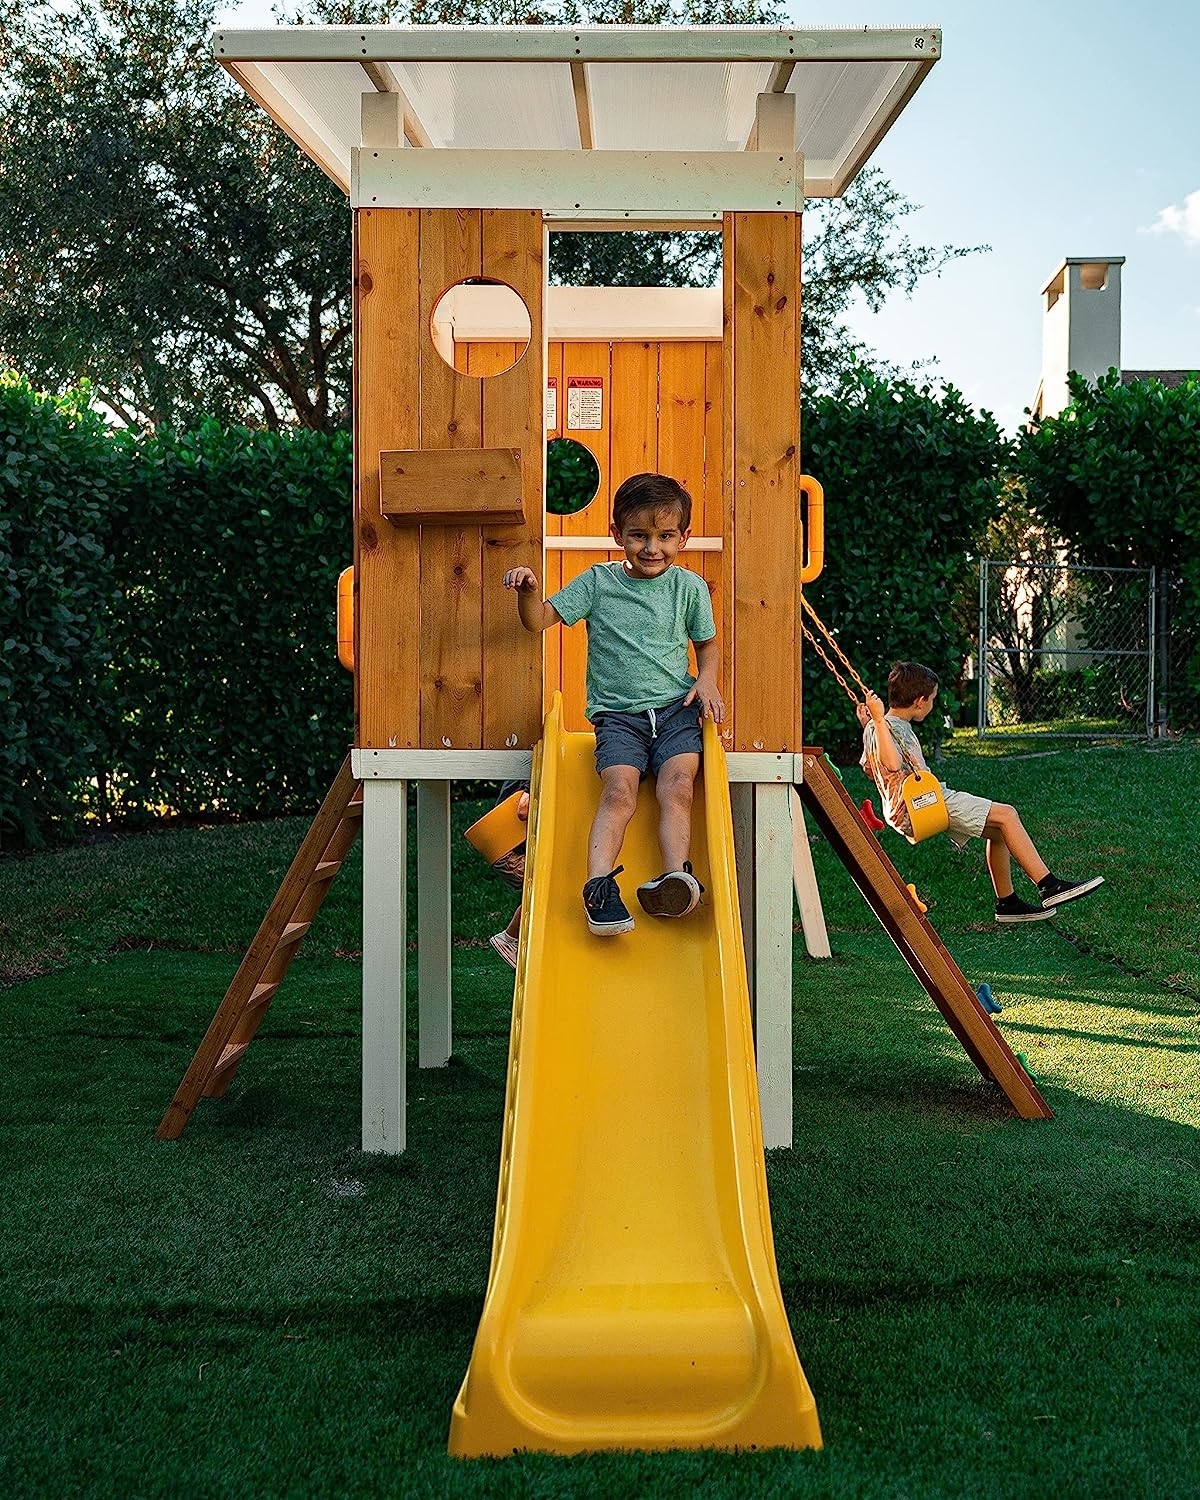 play set with swings, a rock wall, ladder, slide, and more